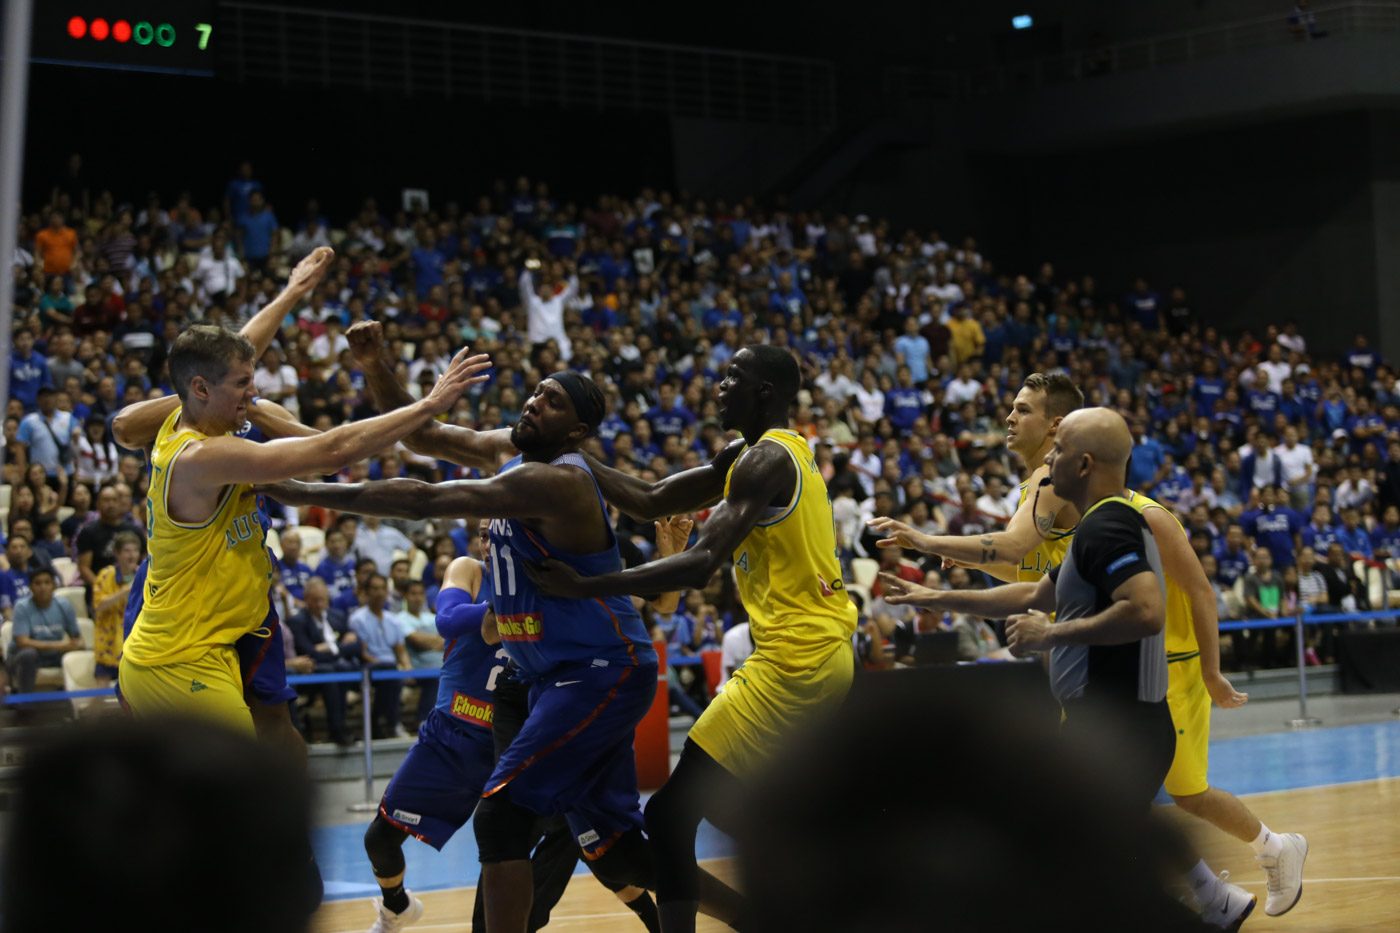 10 Gilas players suspended, SBP fined for FIBA brawl